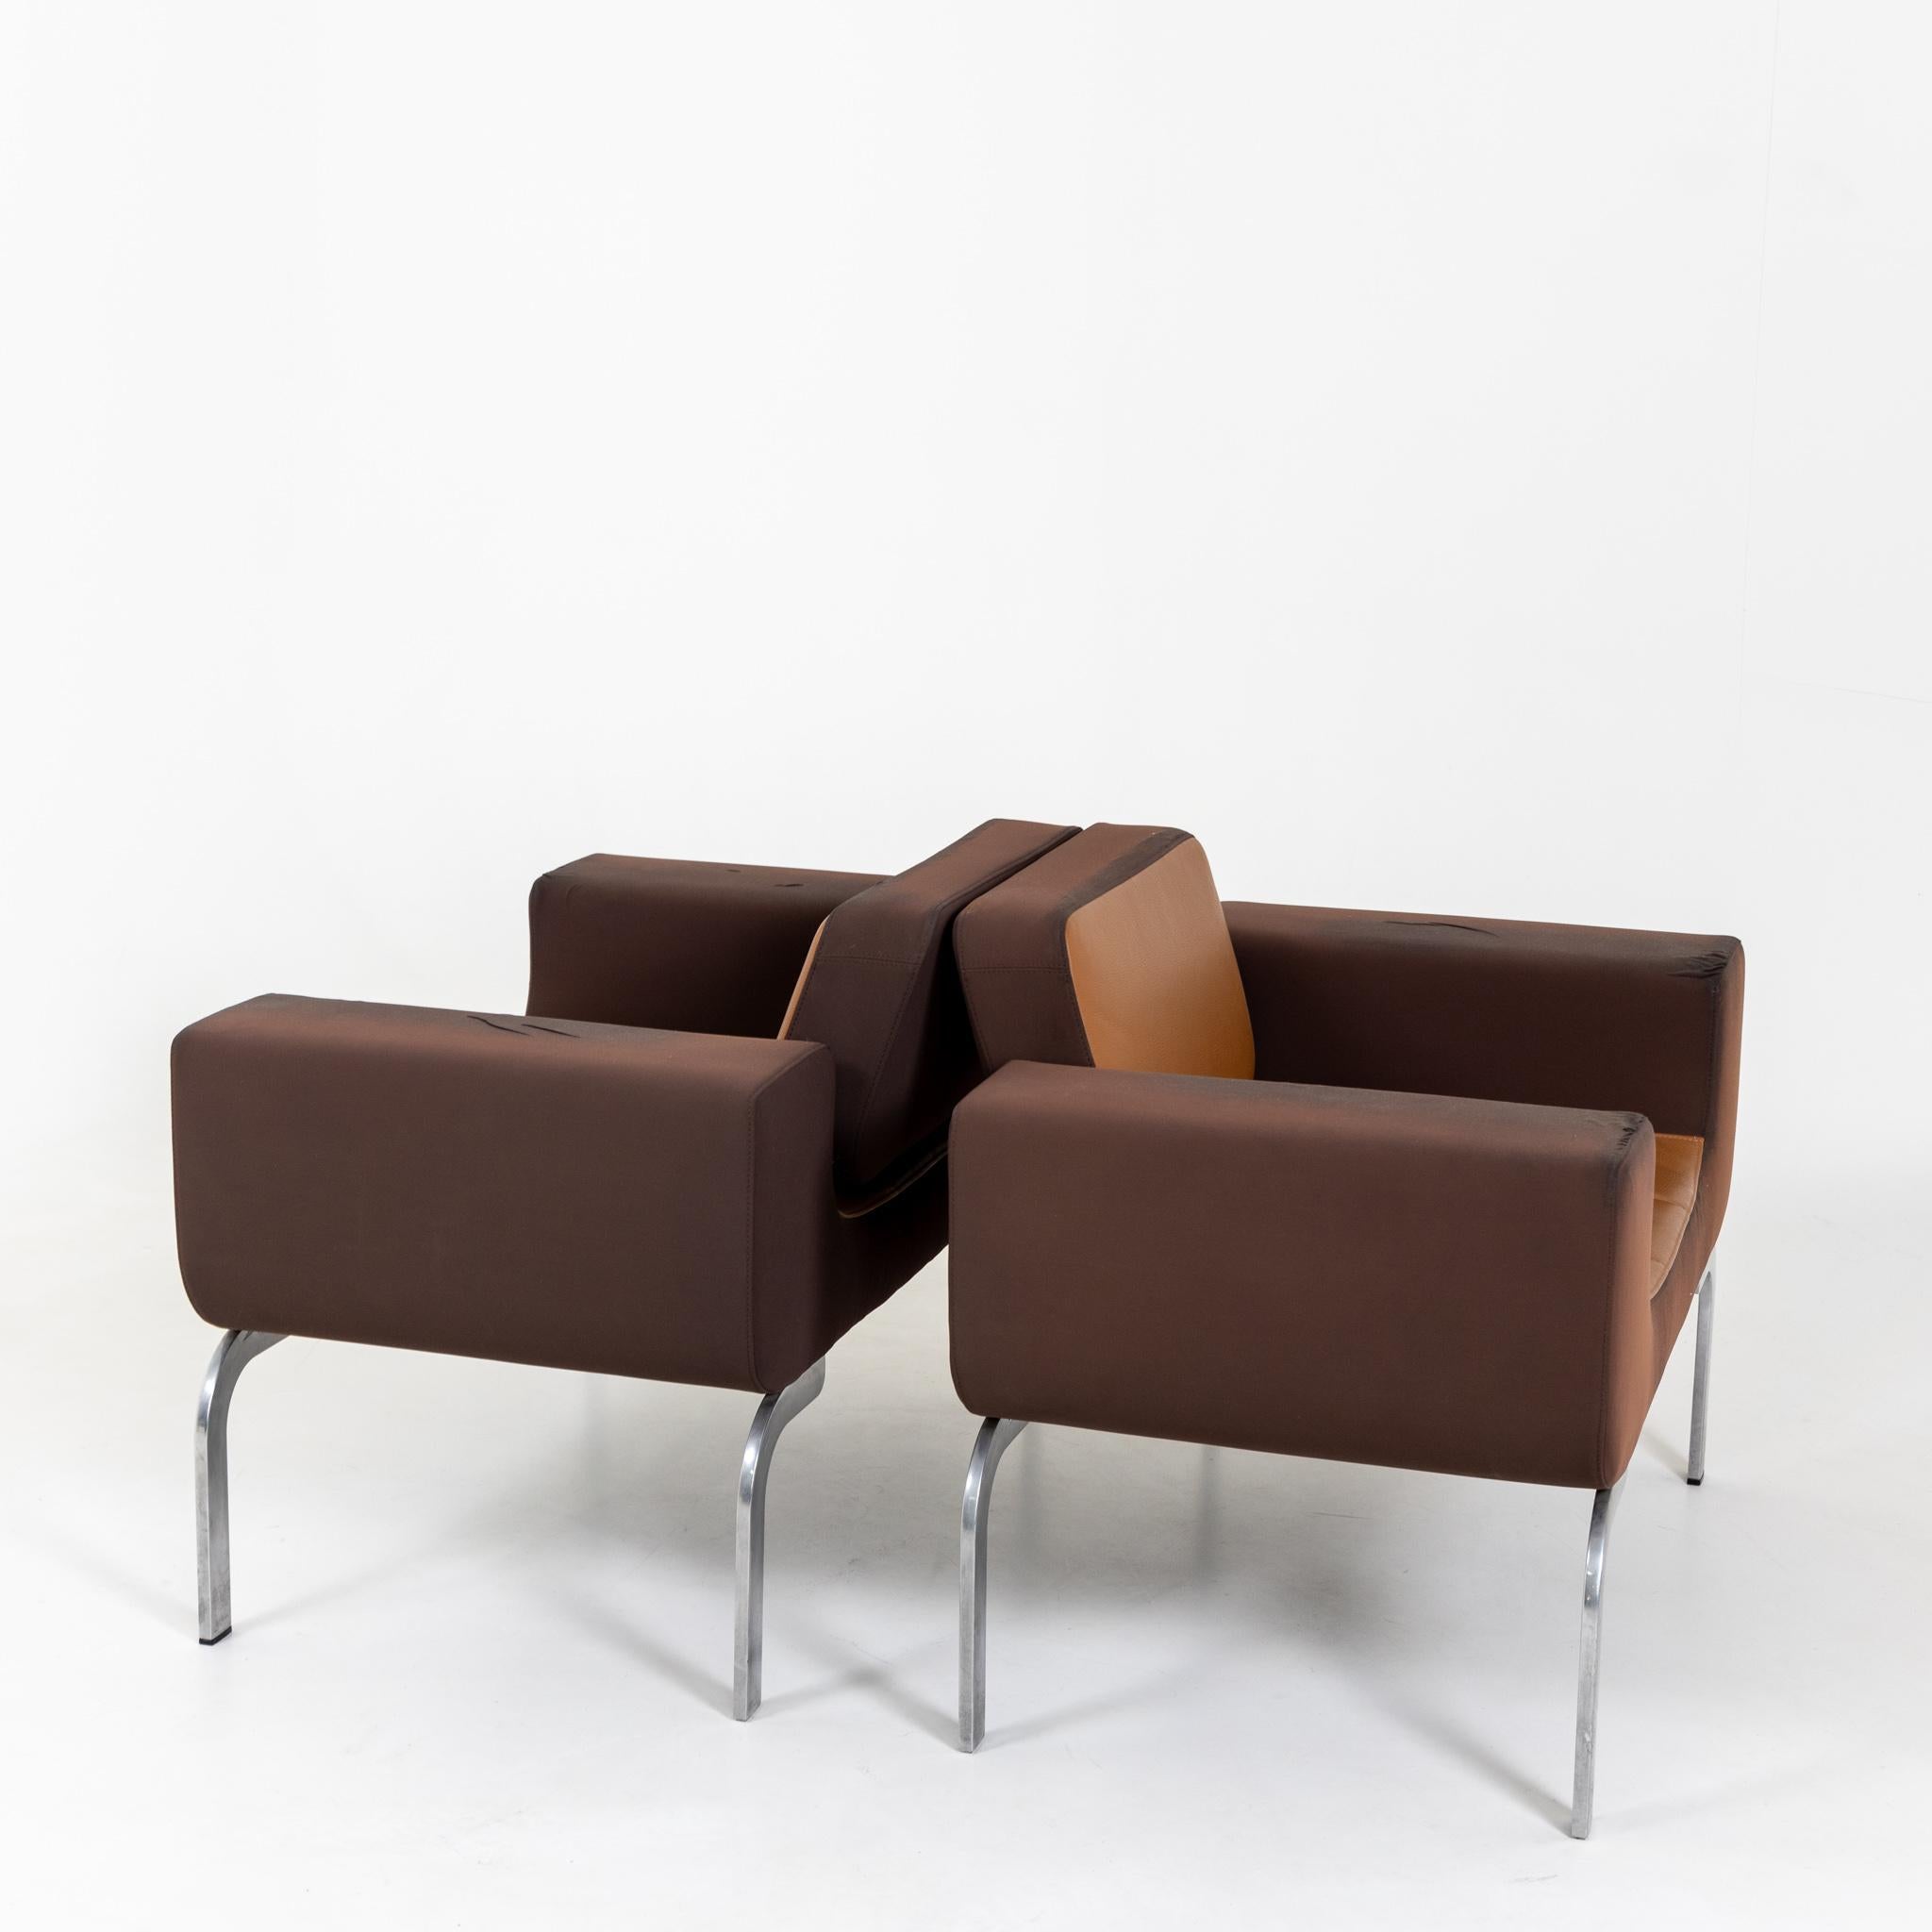 Late 20th Century Pair of Brown Lounge Chairs, Fabric and Metal, Italy 1970s For Sale